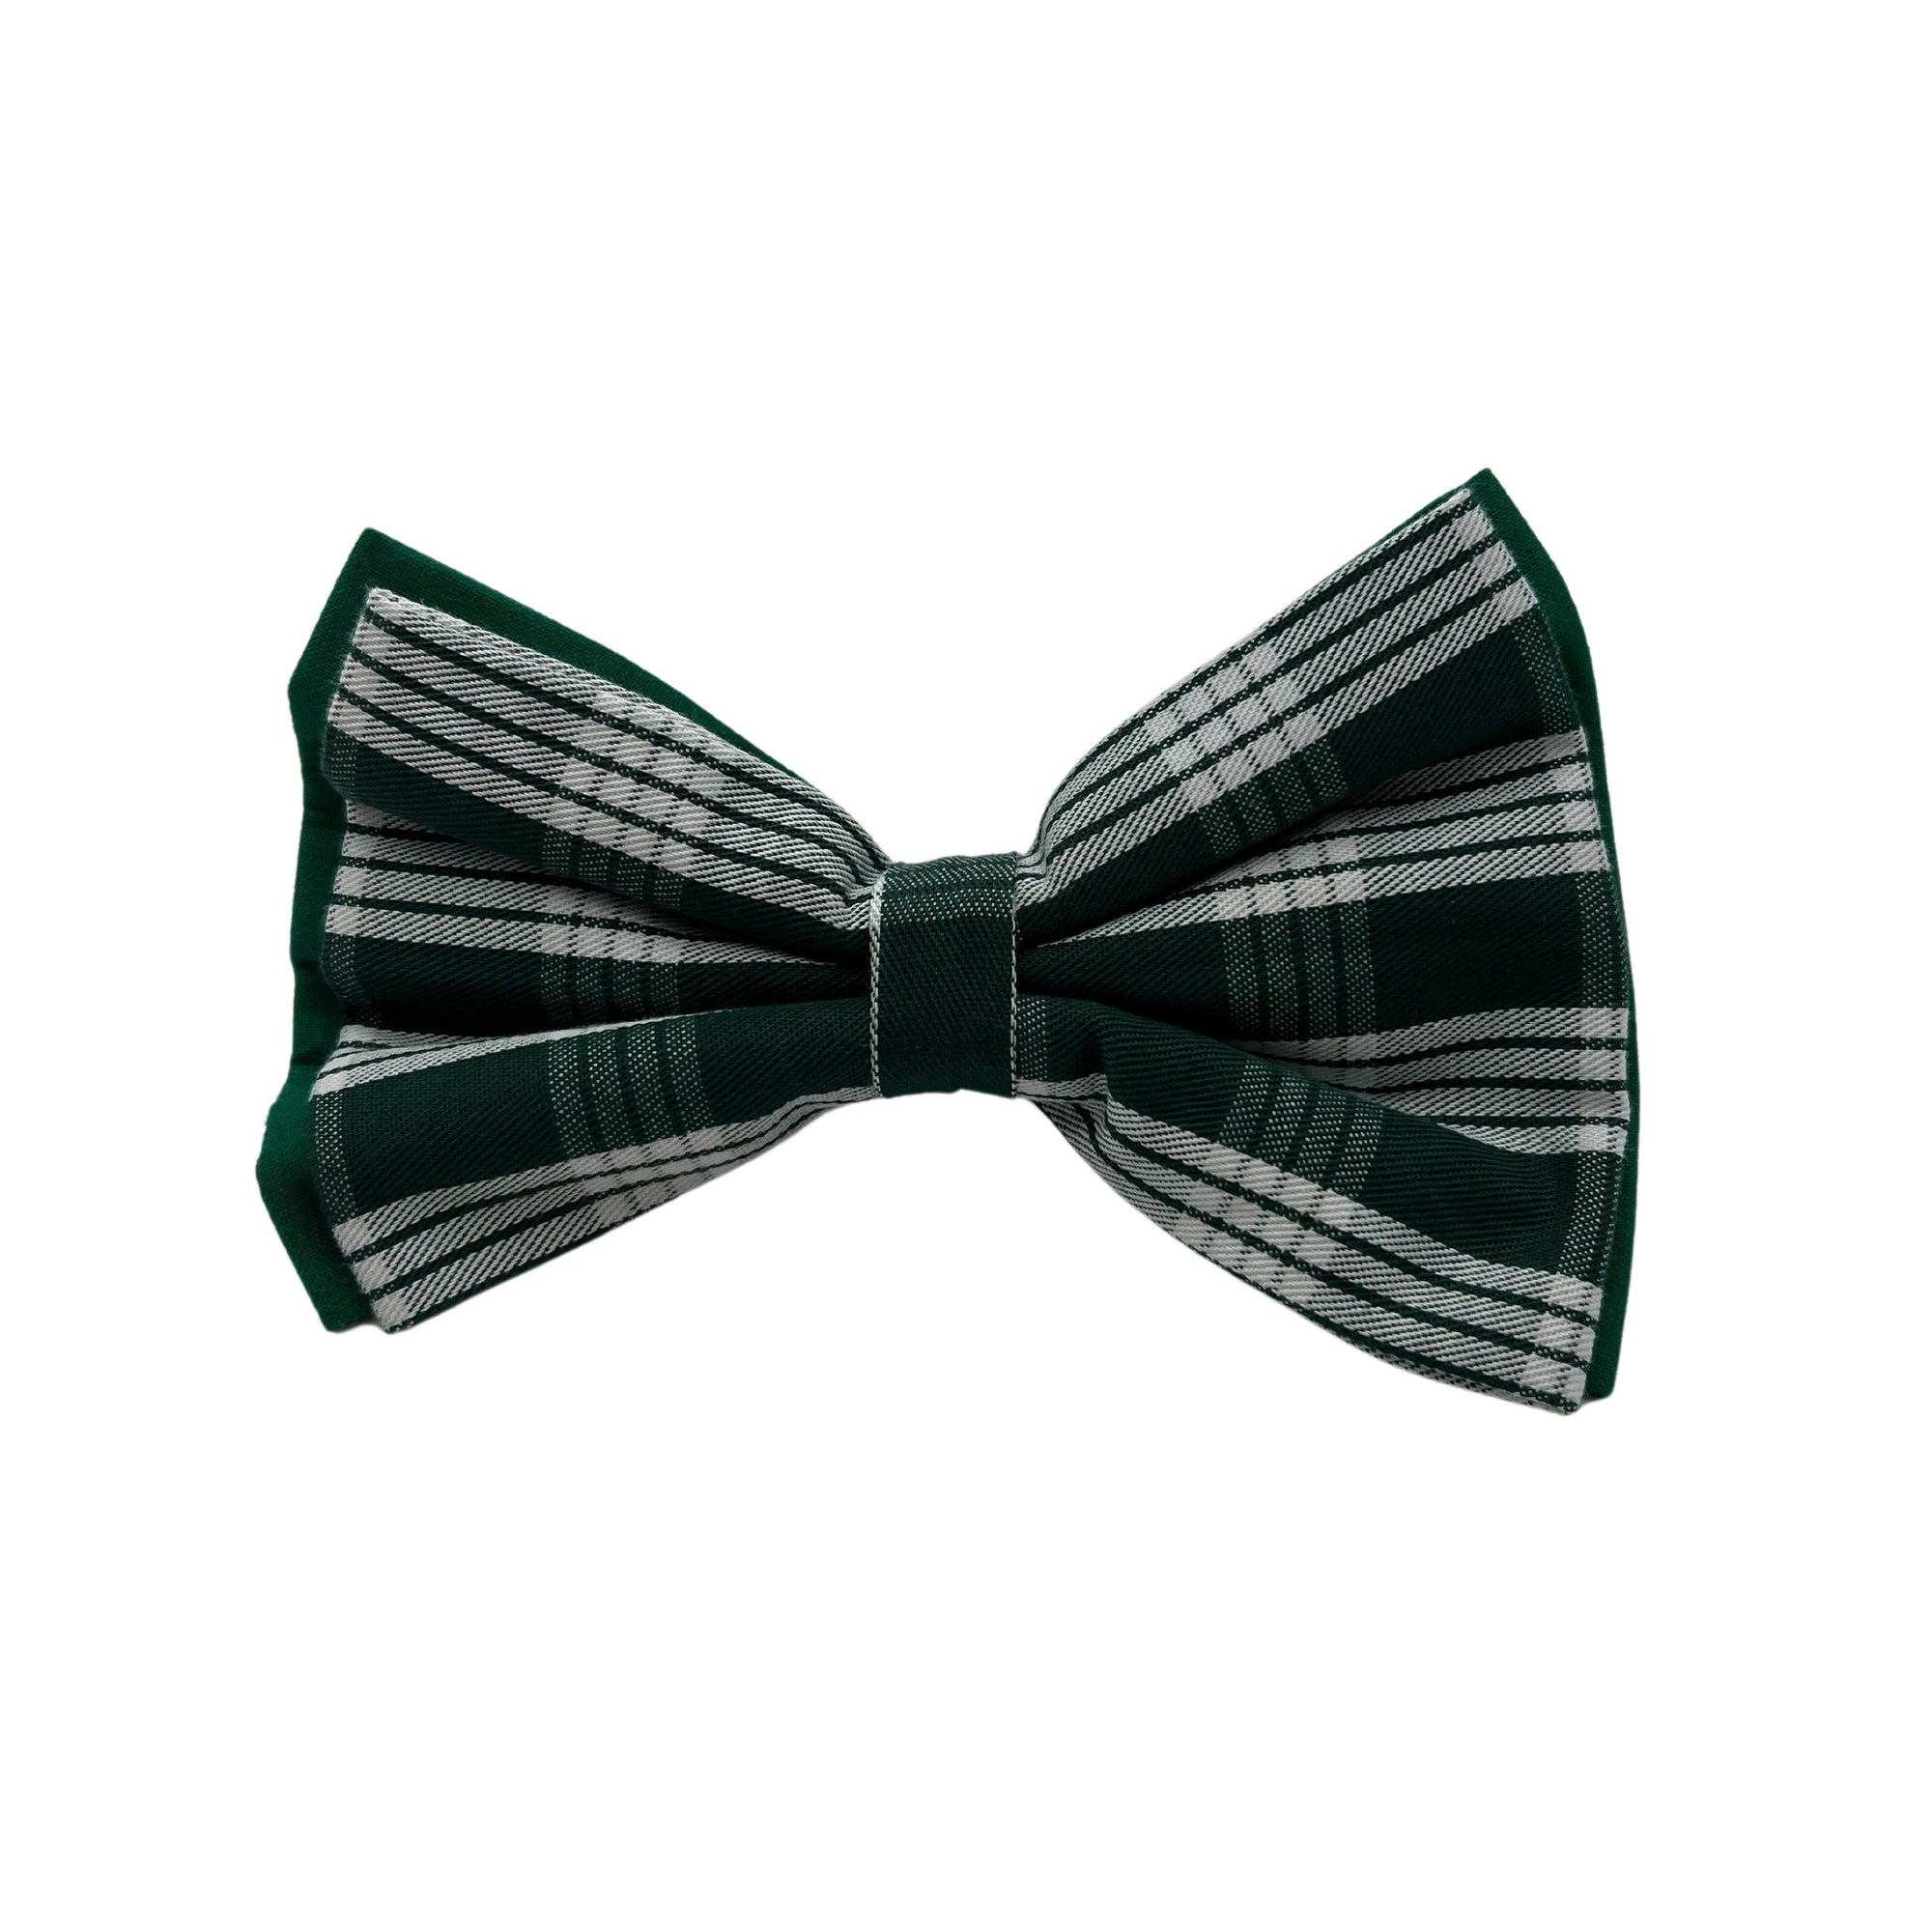 Large Double Bow Tie - Green Plaid